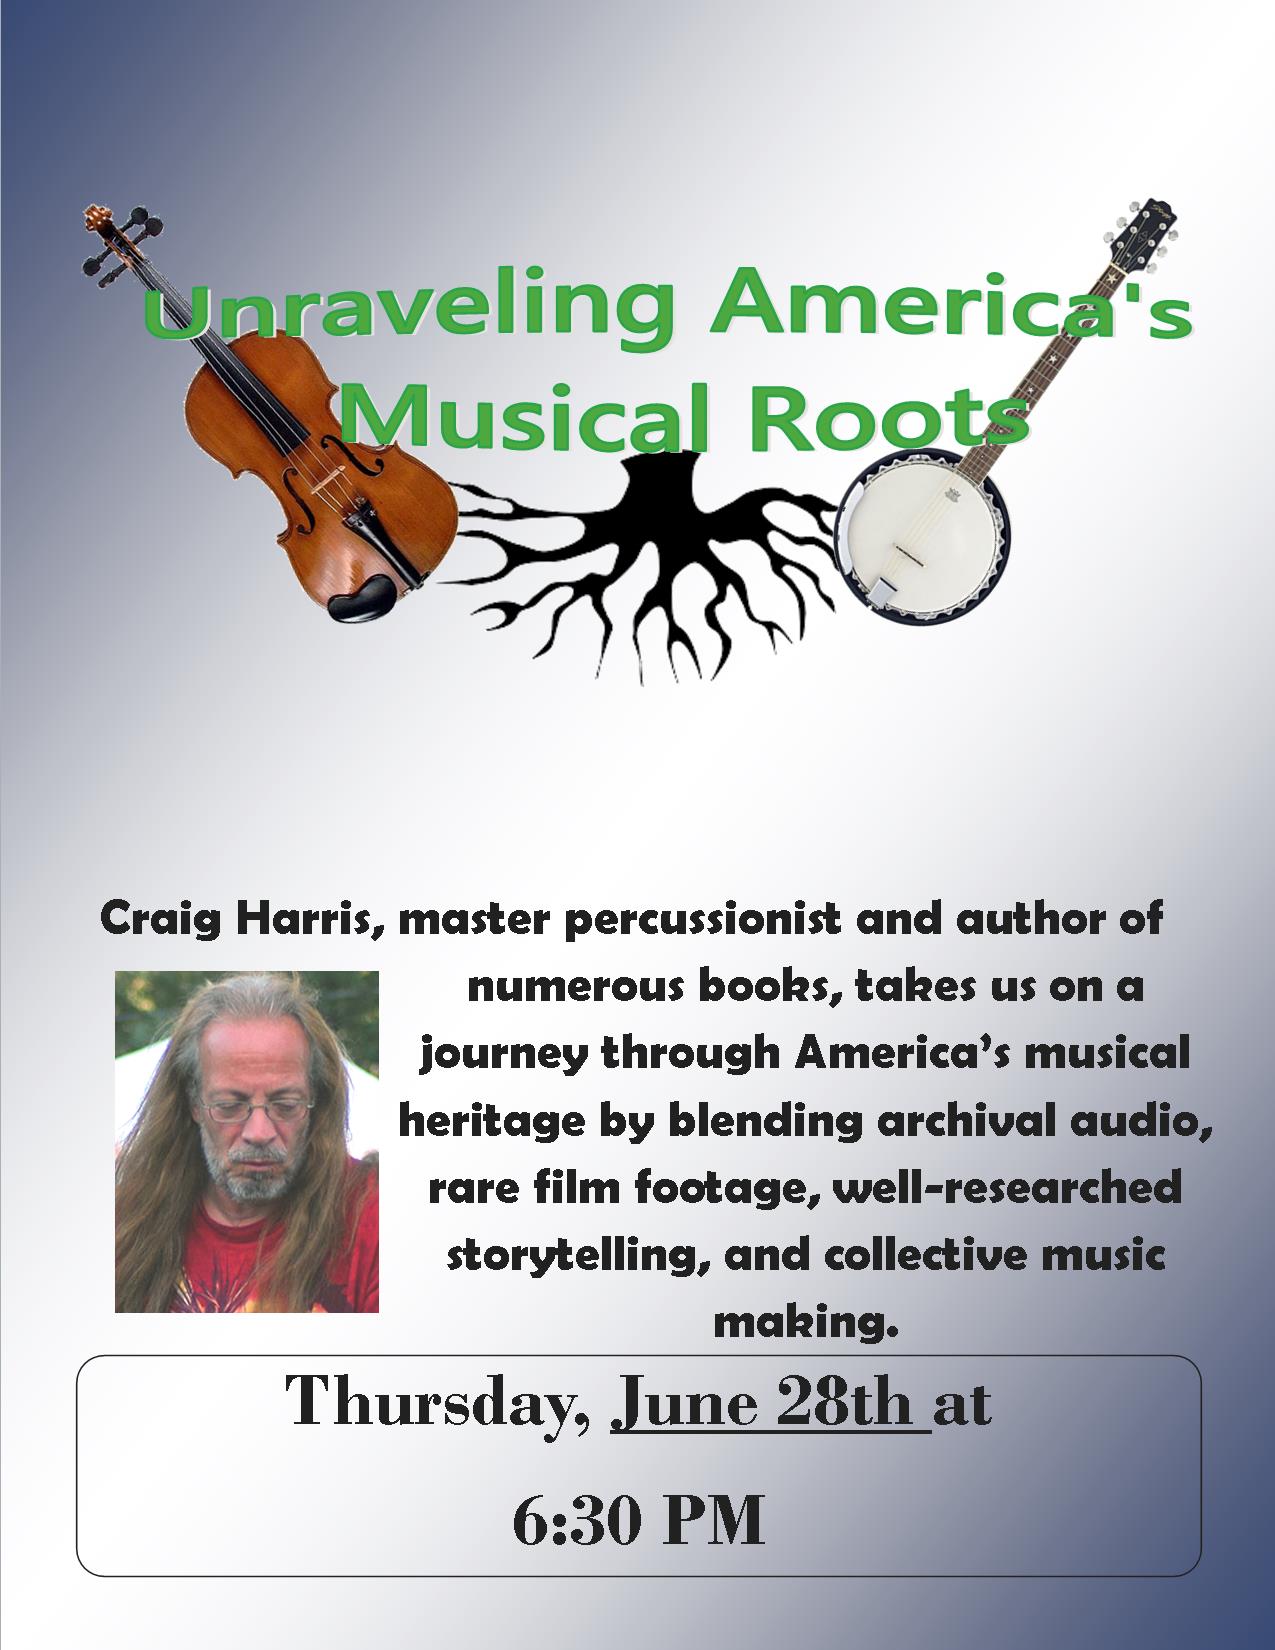 Unraveling America's Musical Roots with Craig Harris